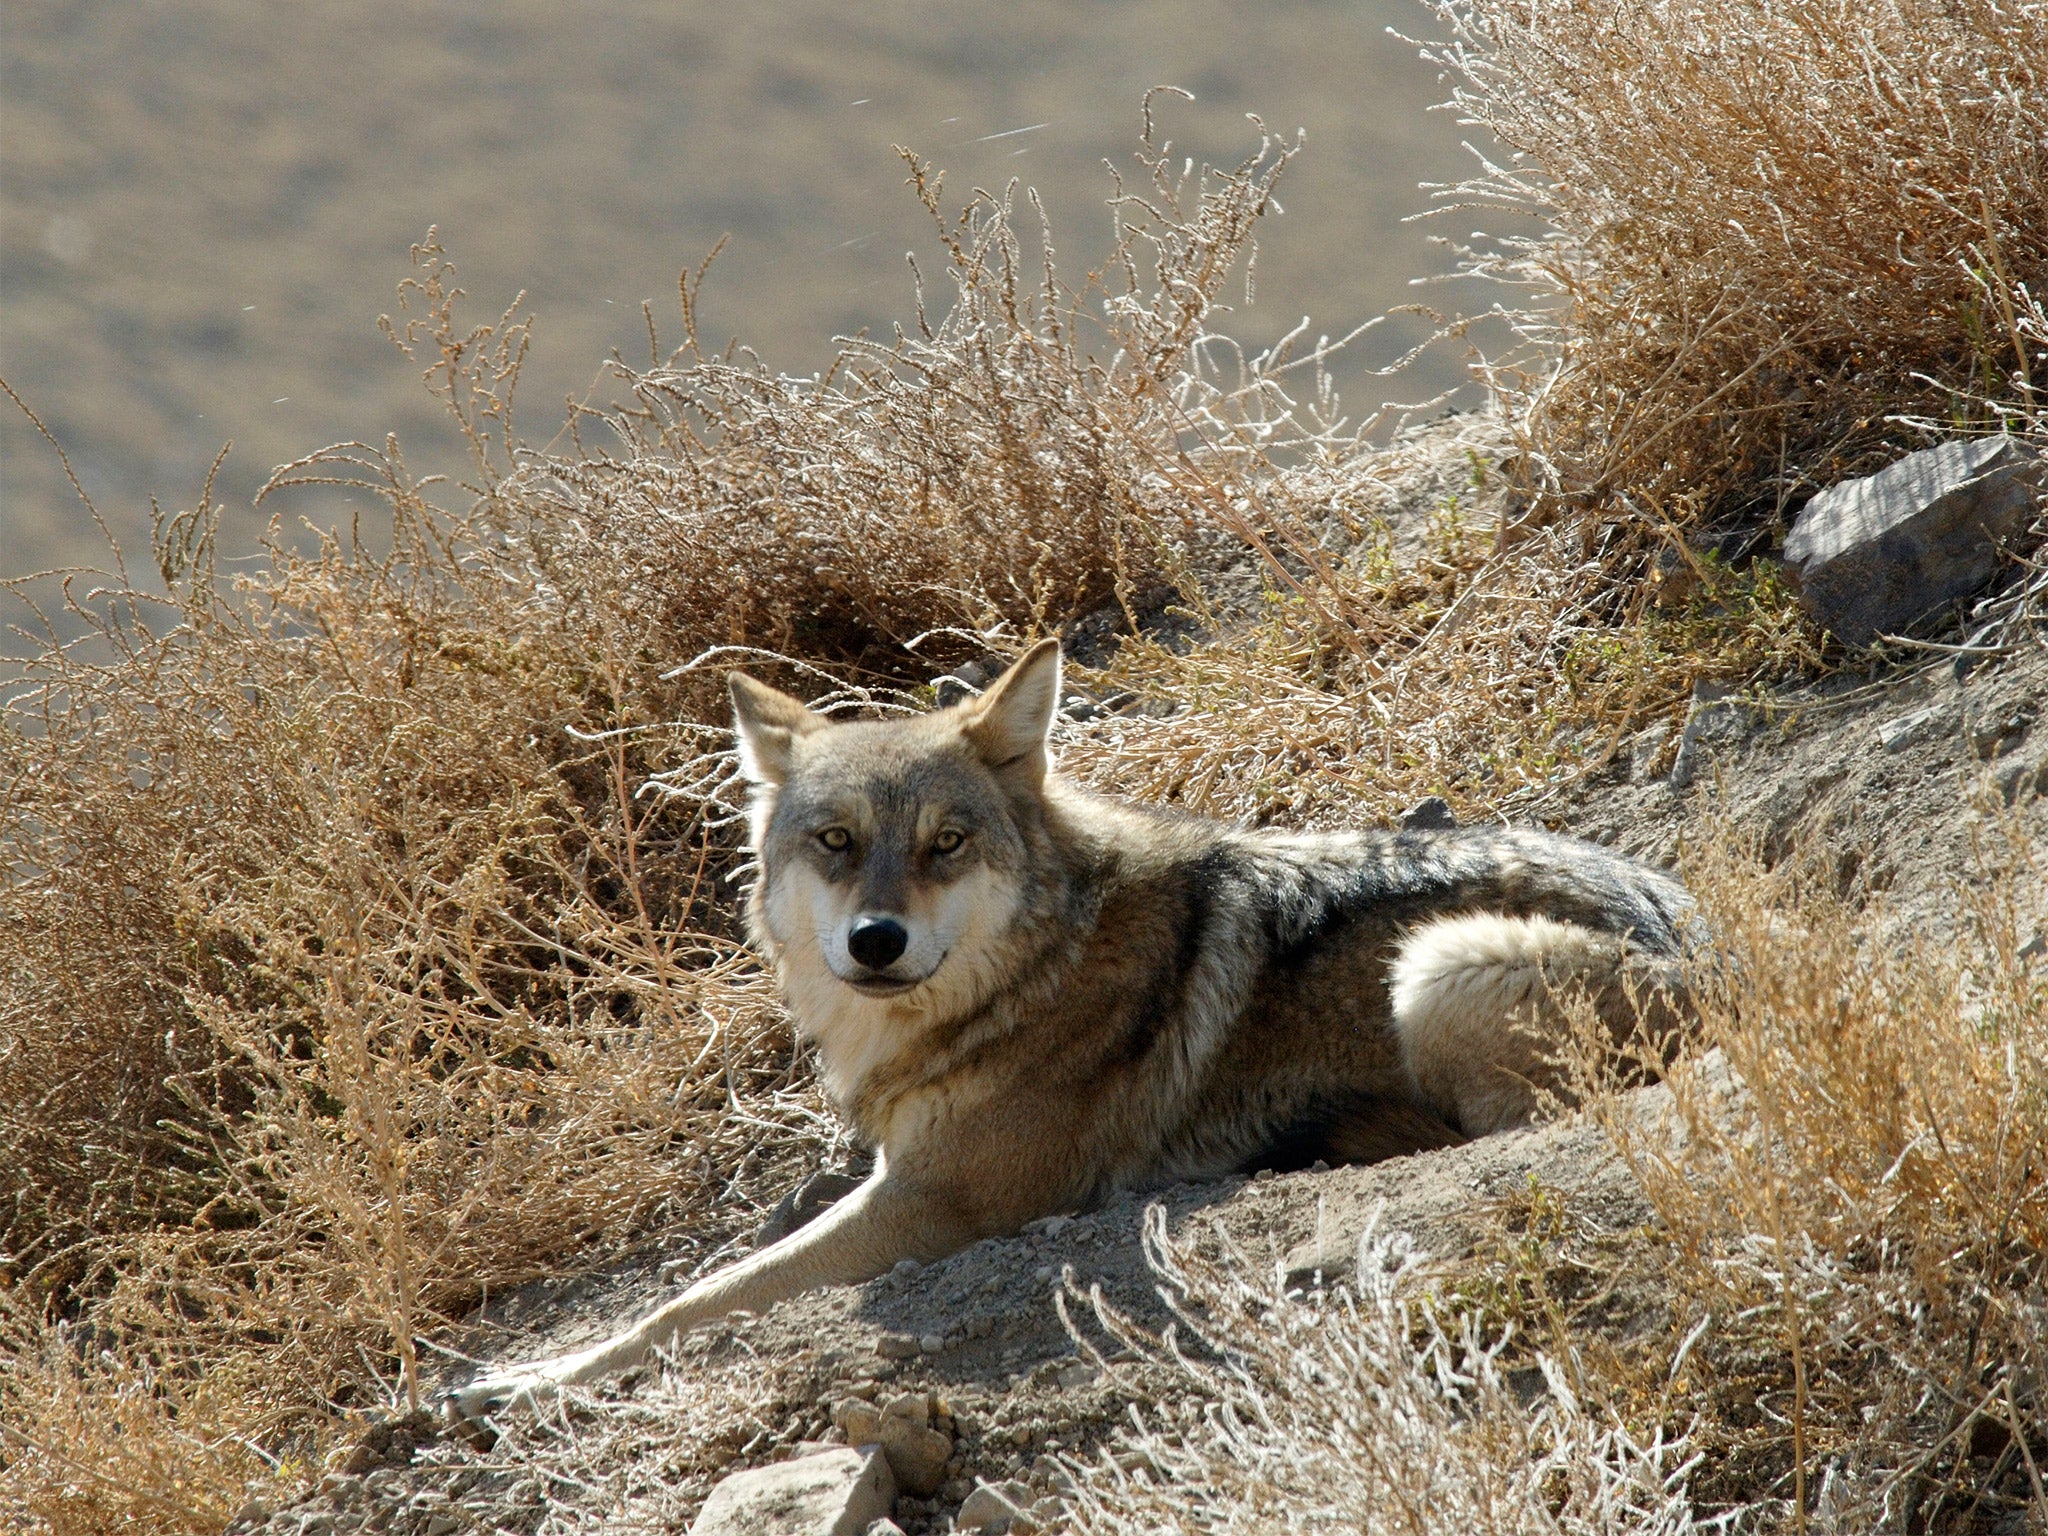 &#13;
A grey wolf in Xinjiang, China. Indigenous Chinese dogs had closer genetic links to their wolf ancestors than other dogs &#13;